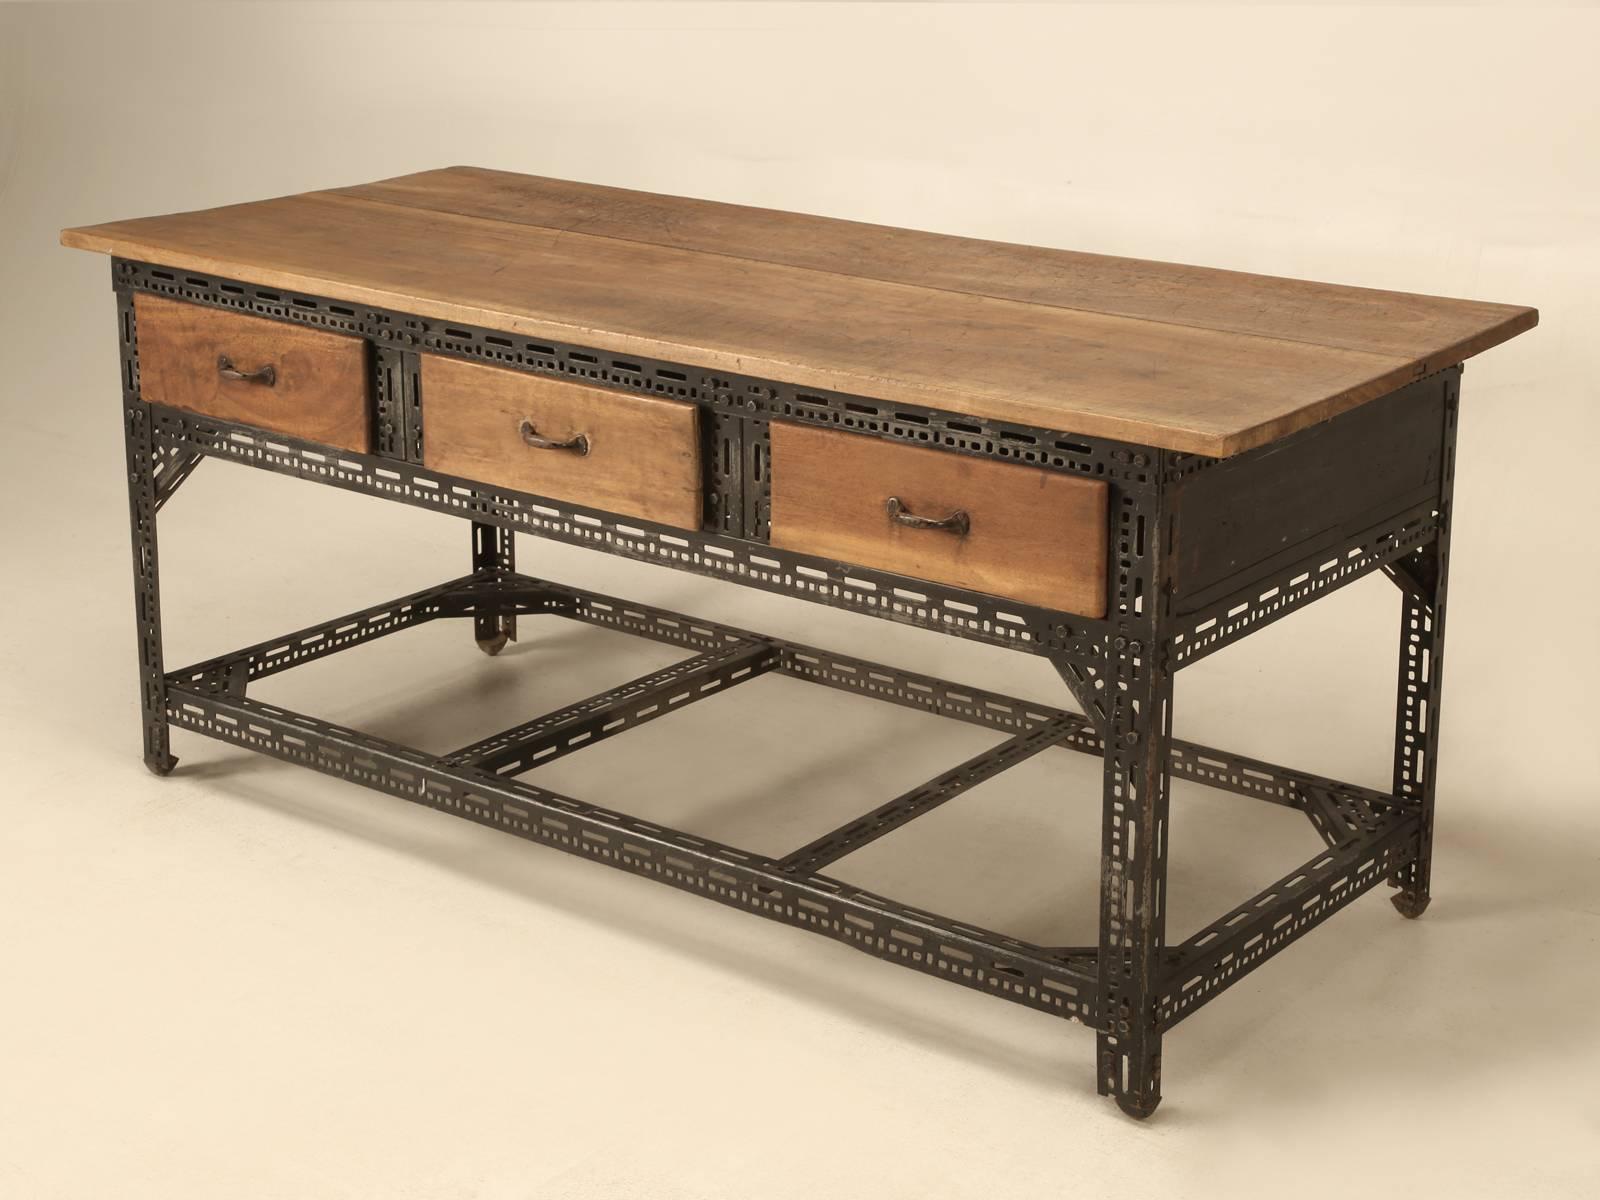 French Industrial steel and walnut factory table, with a beautiful two board top and three large and very functional drawers. We purposely left the walnut top in an as found condition, but it might make for a wonderful juxtaposition if we refinished